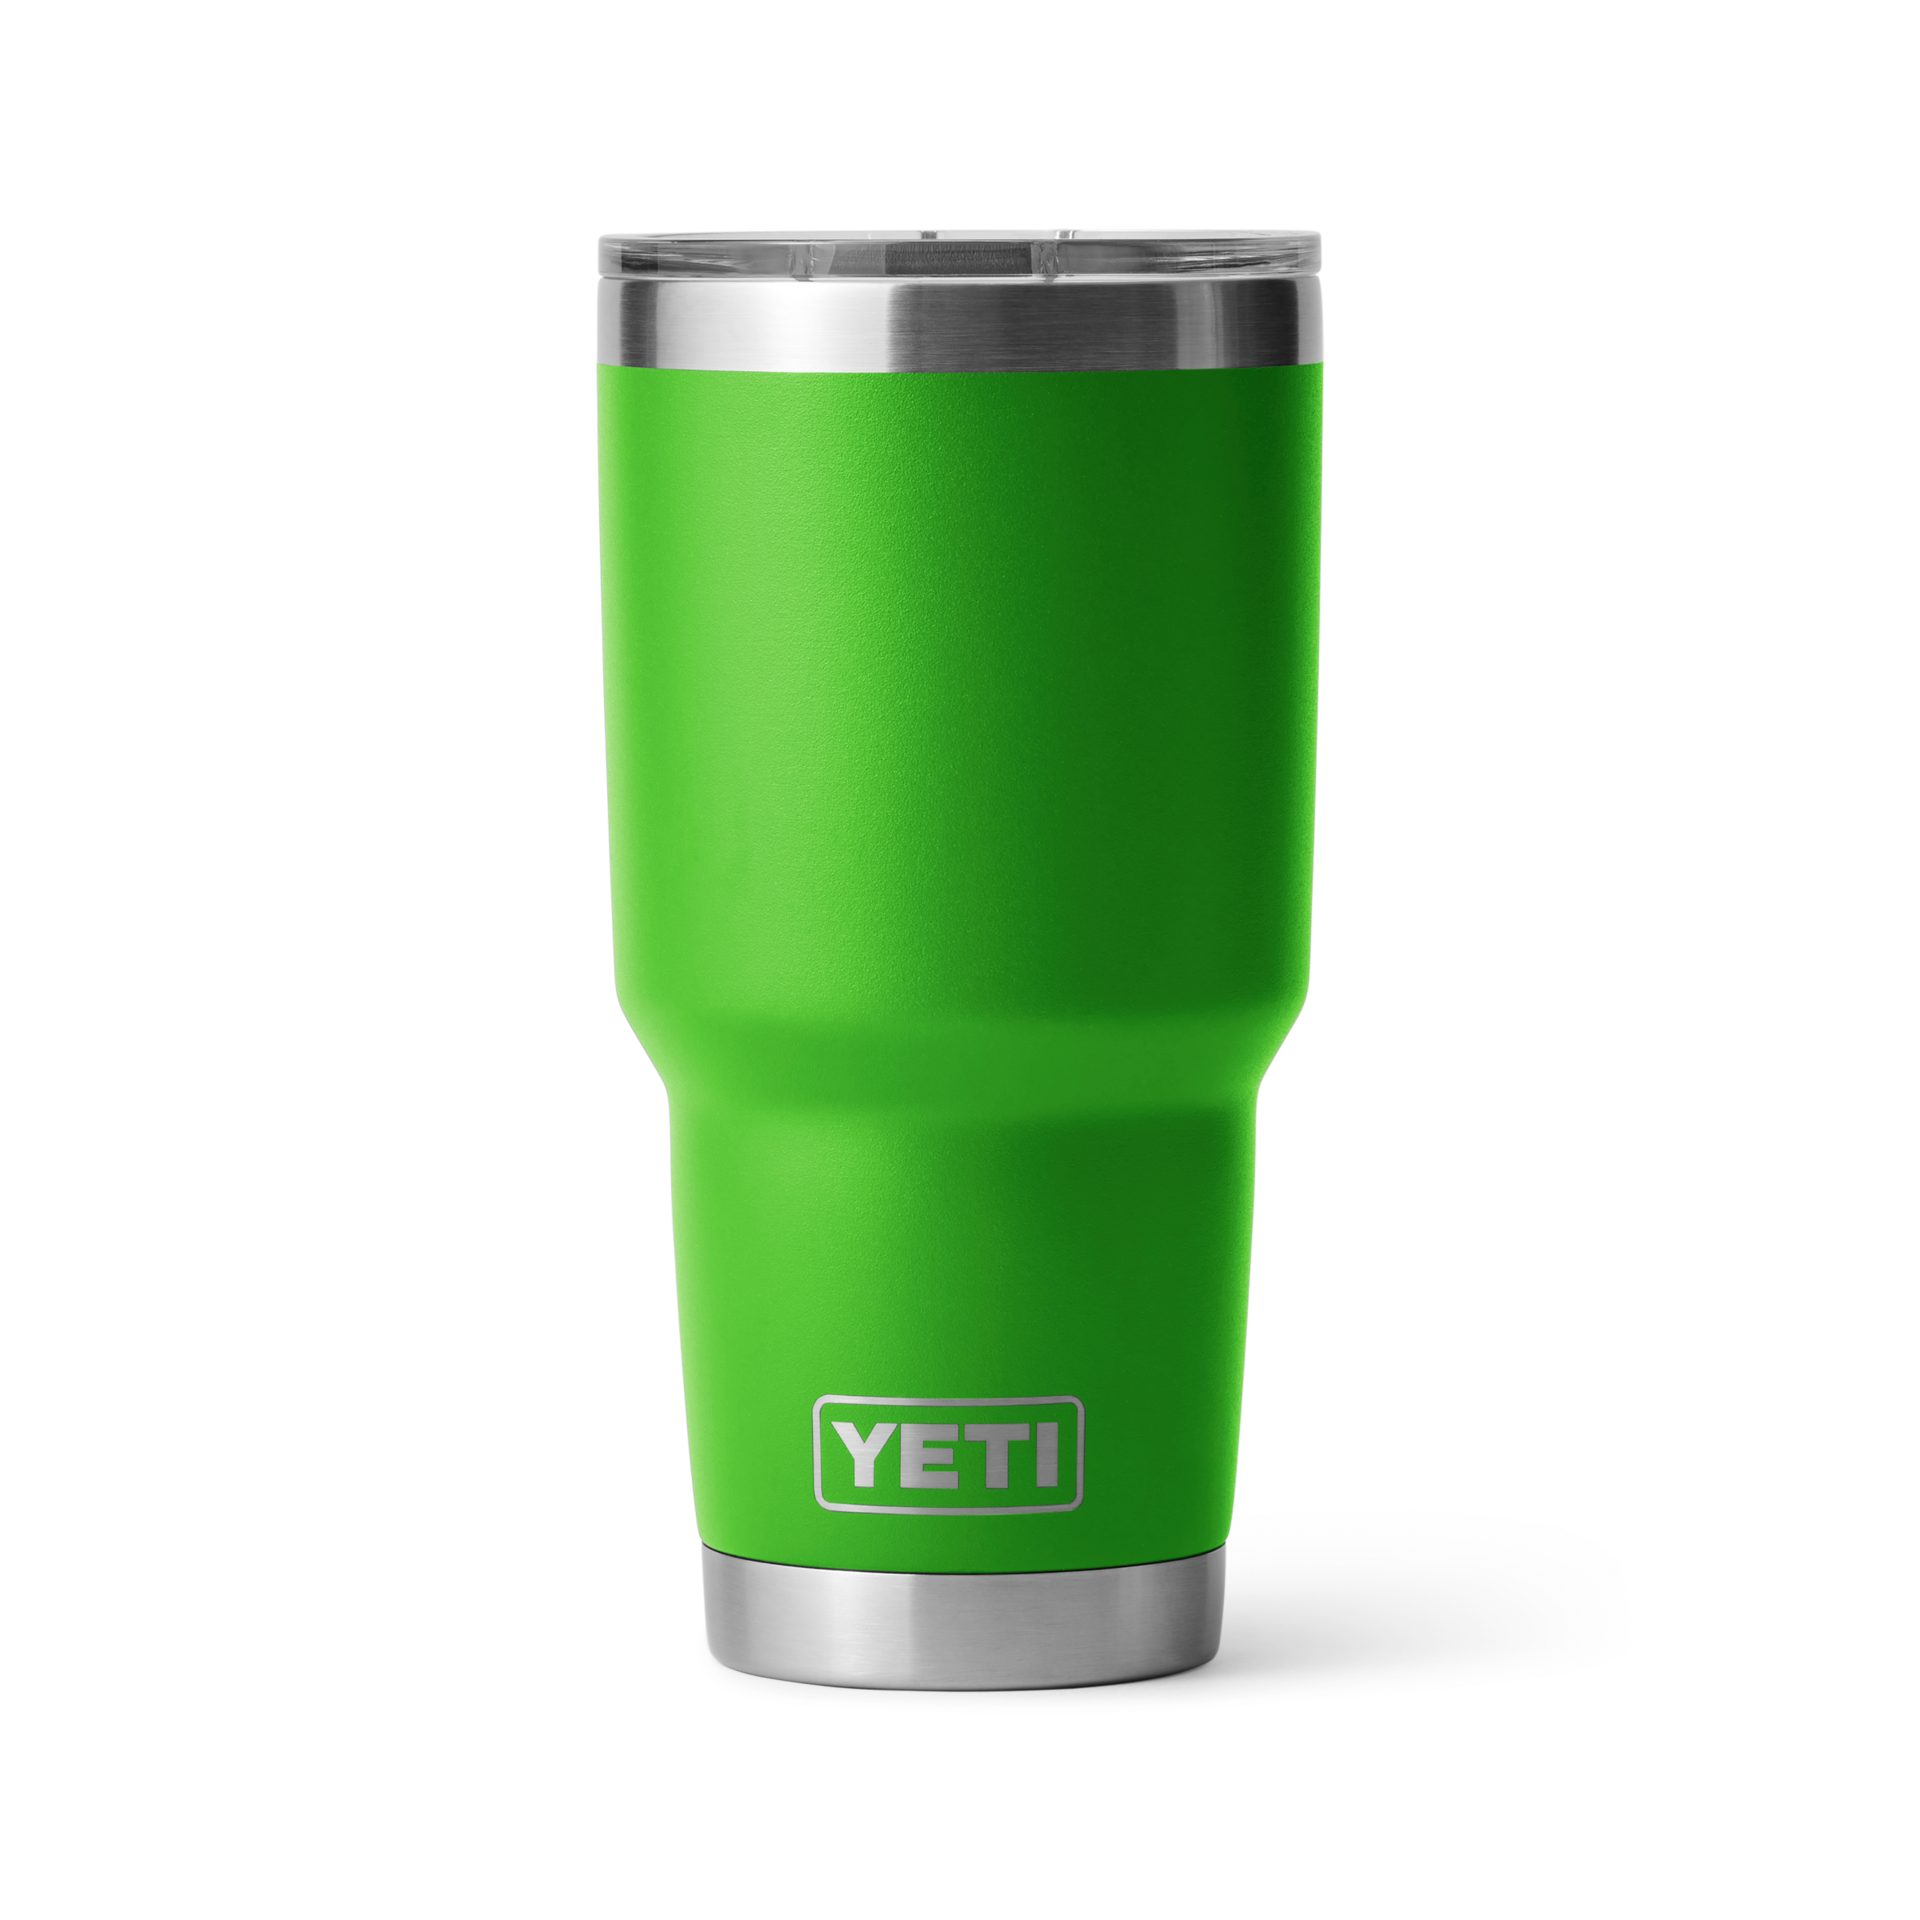 YETI Canopy Green Color Collection